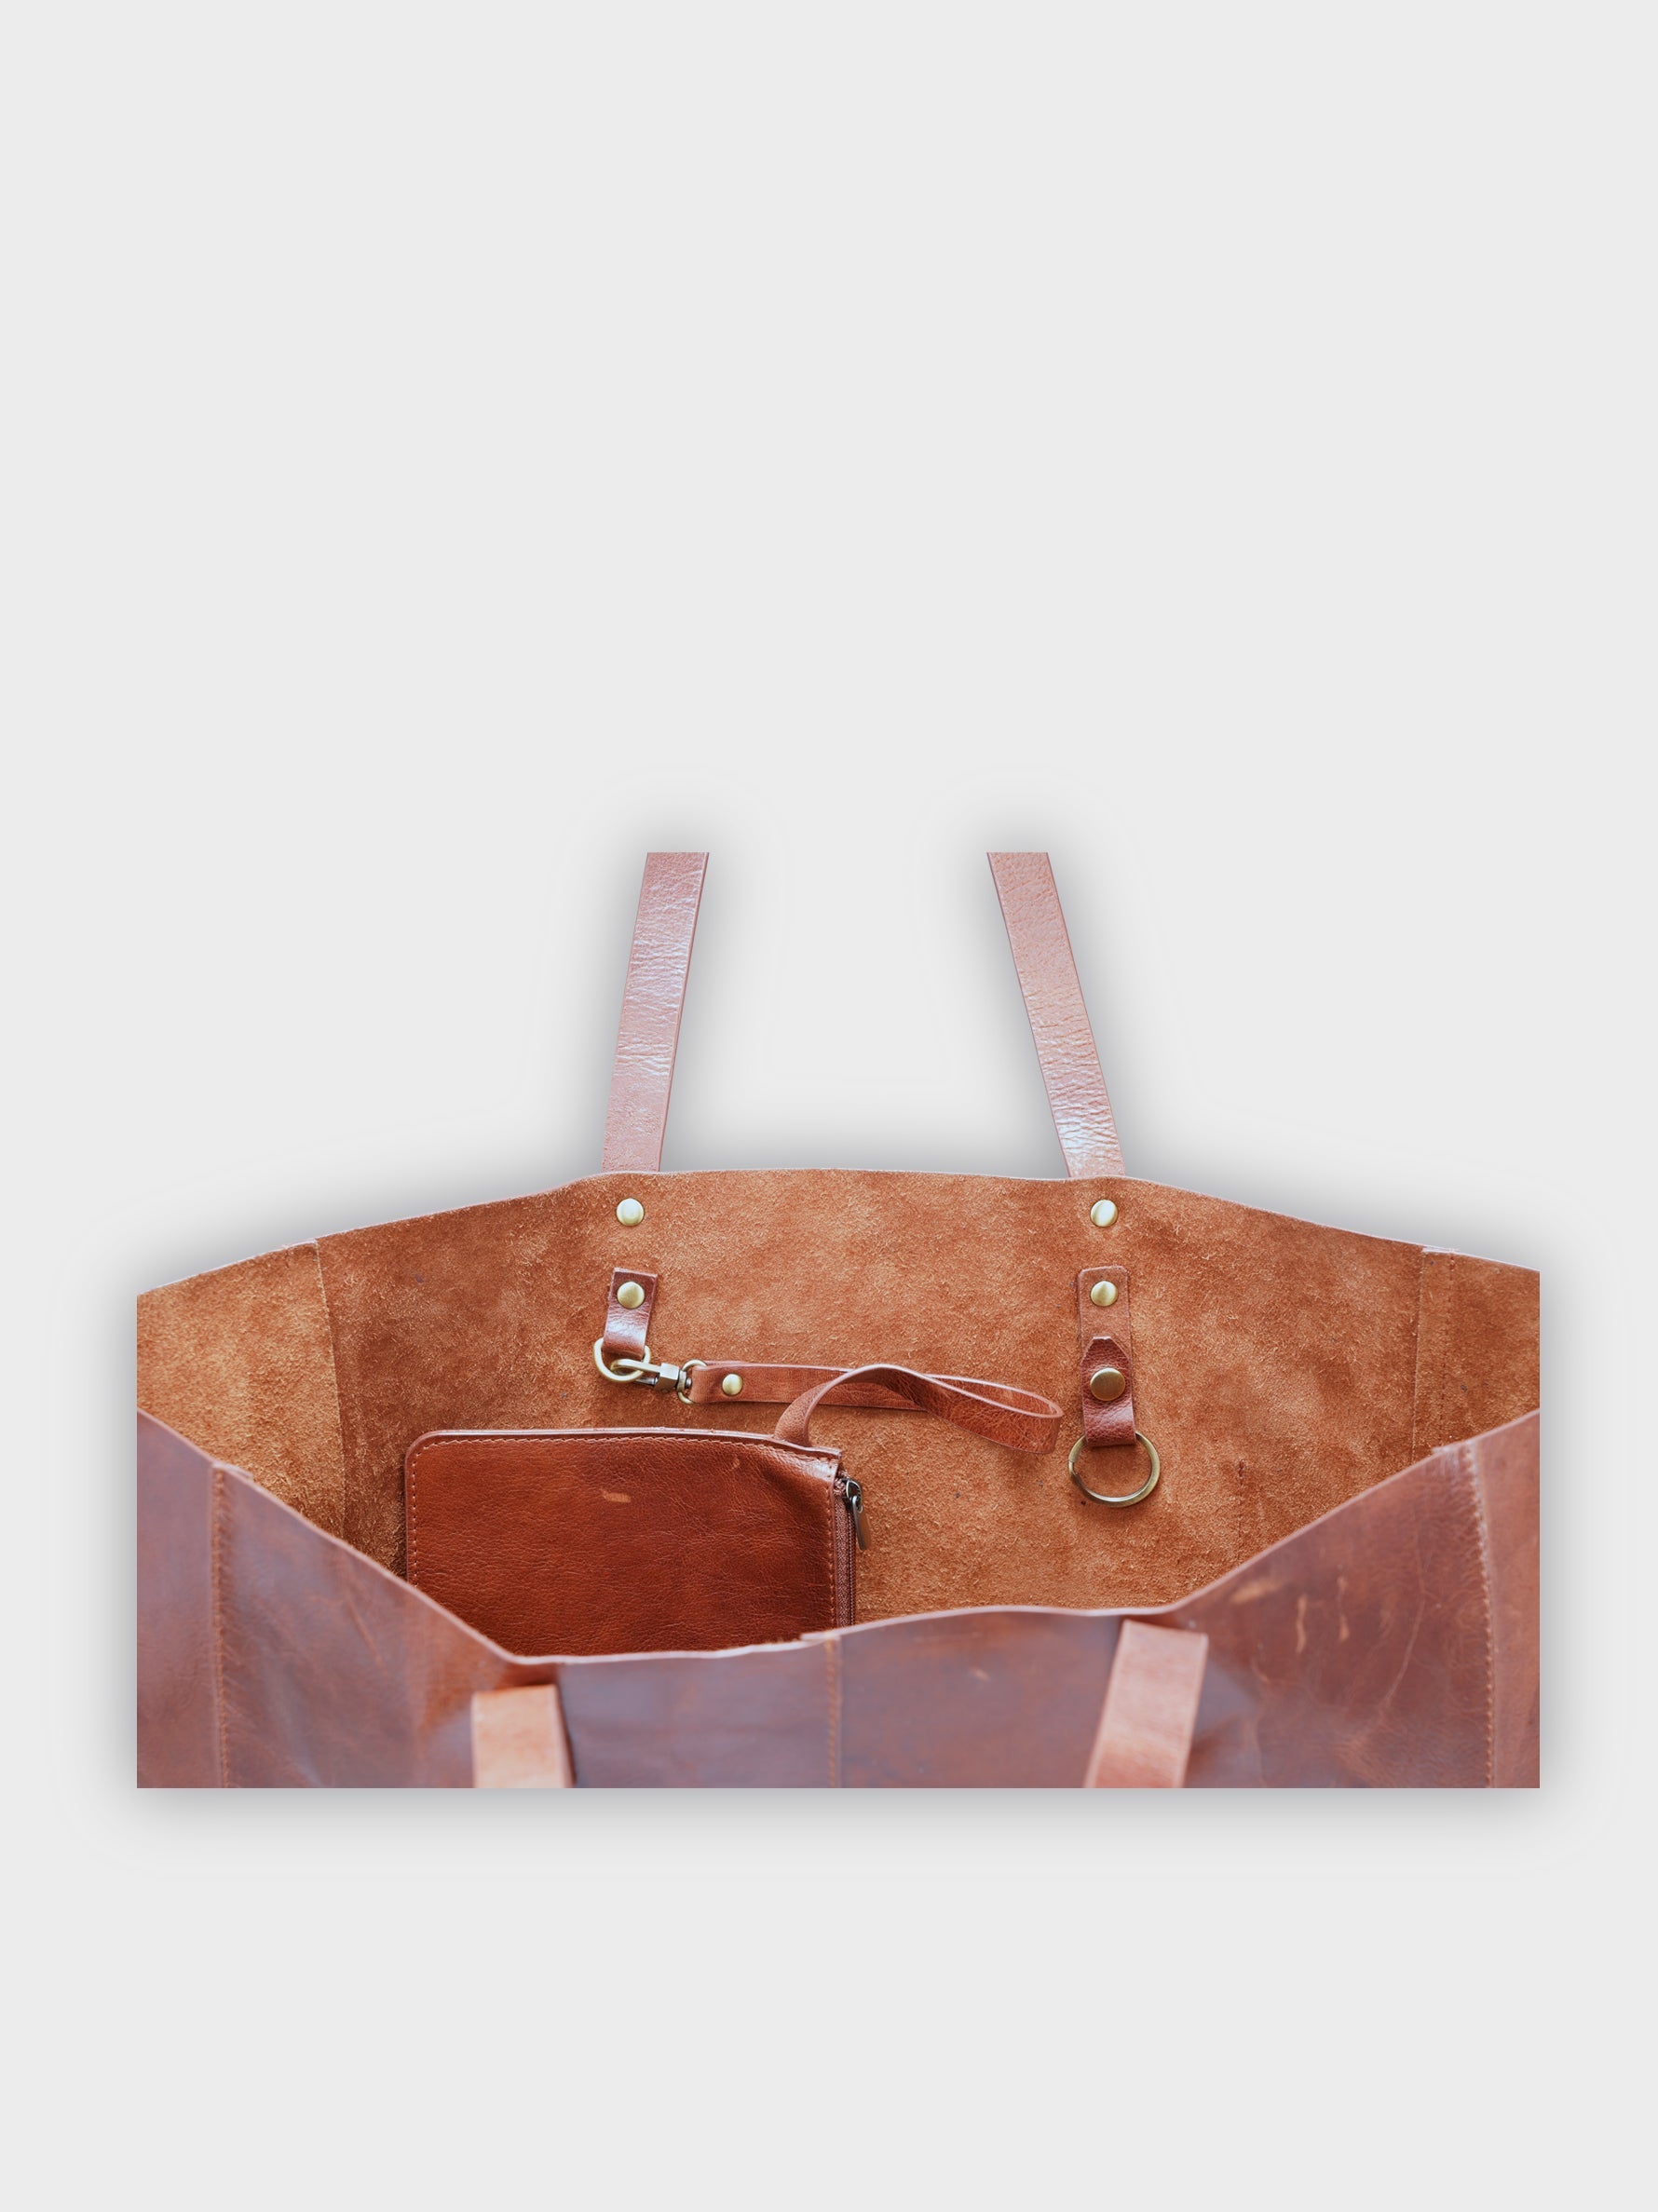 Handcrafted Genuine Vegetable Tanned Leather Old Fashioned Tote Large Vintage Brown for Women Tan & Loom